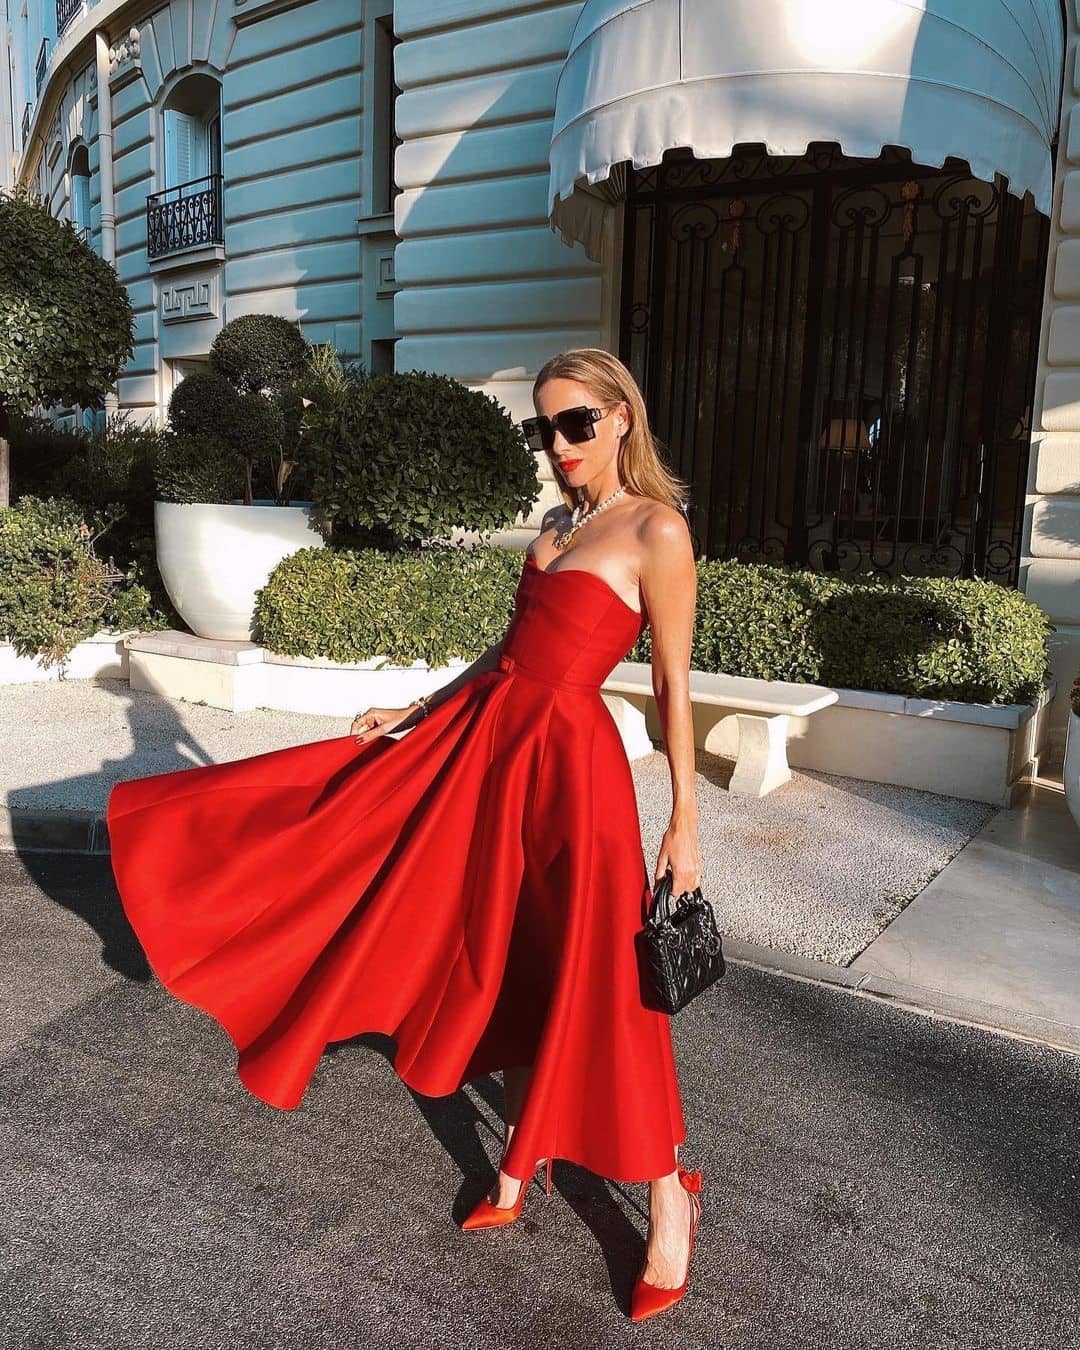 Melody Jacob: How in - 27 hottest red summer outfits for women